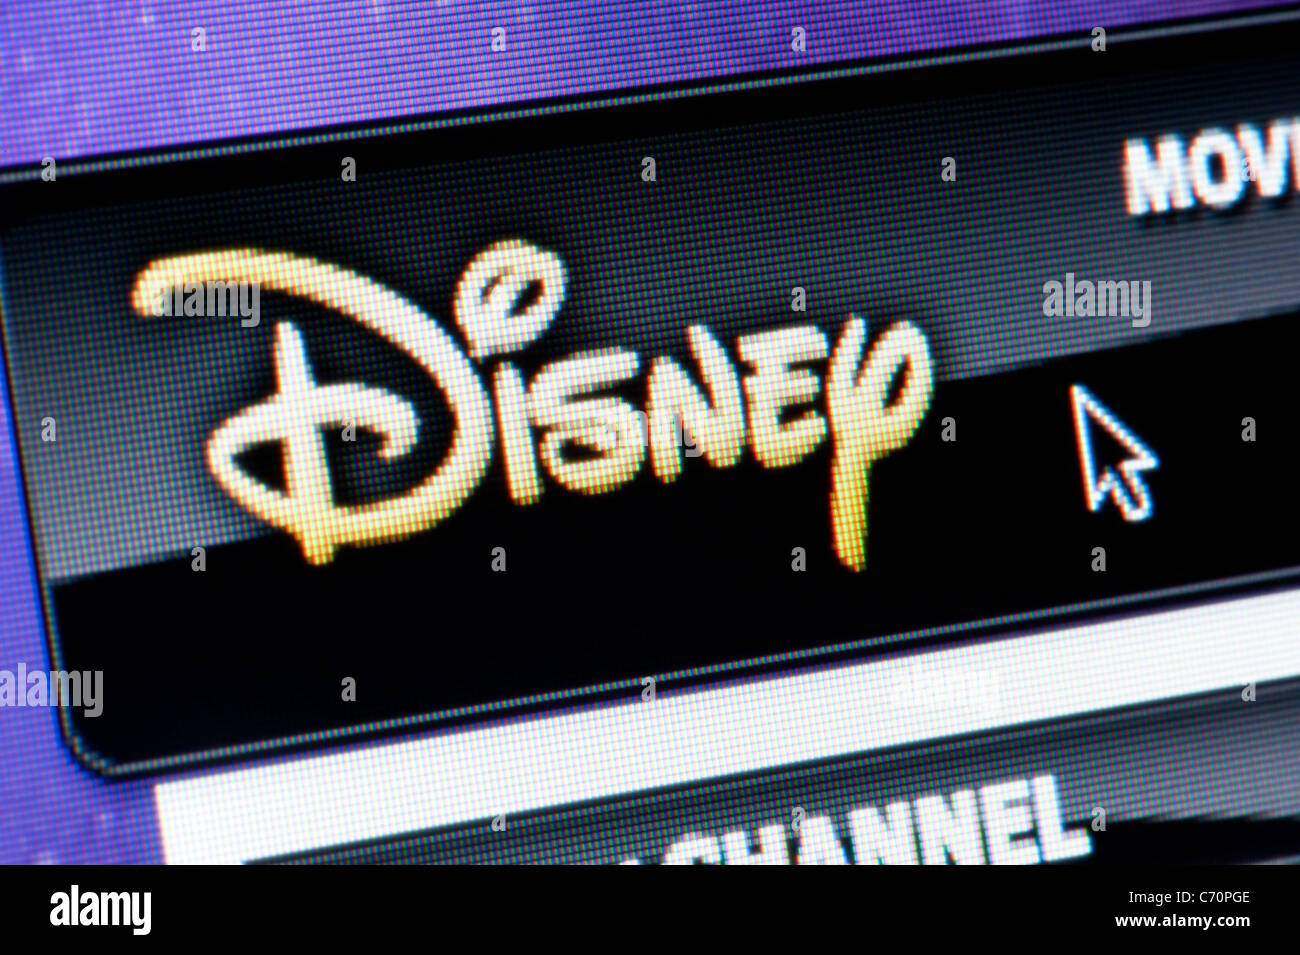 Close up of the Disney logo as seen on its website. (Editorial use only: print, TV, e-book and editorial website). Stock Photo